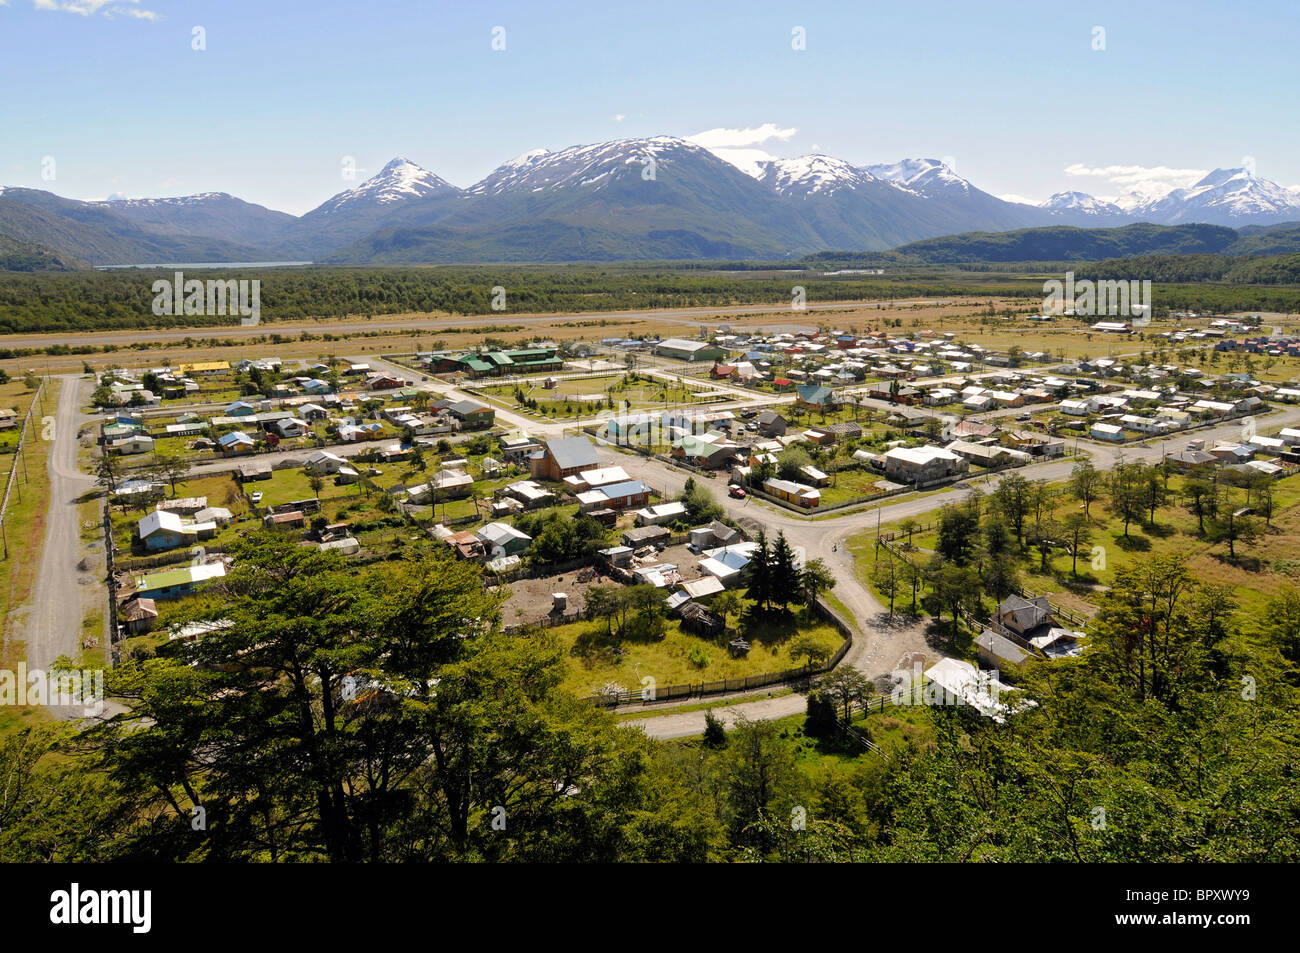 View of the small town of Villa o'Higgins, the last settlement at the end of the road carretera austral  in Patagonia, Chile. Stock Photo